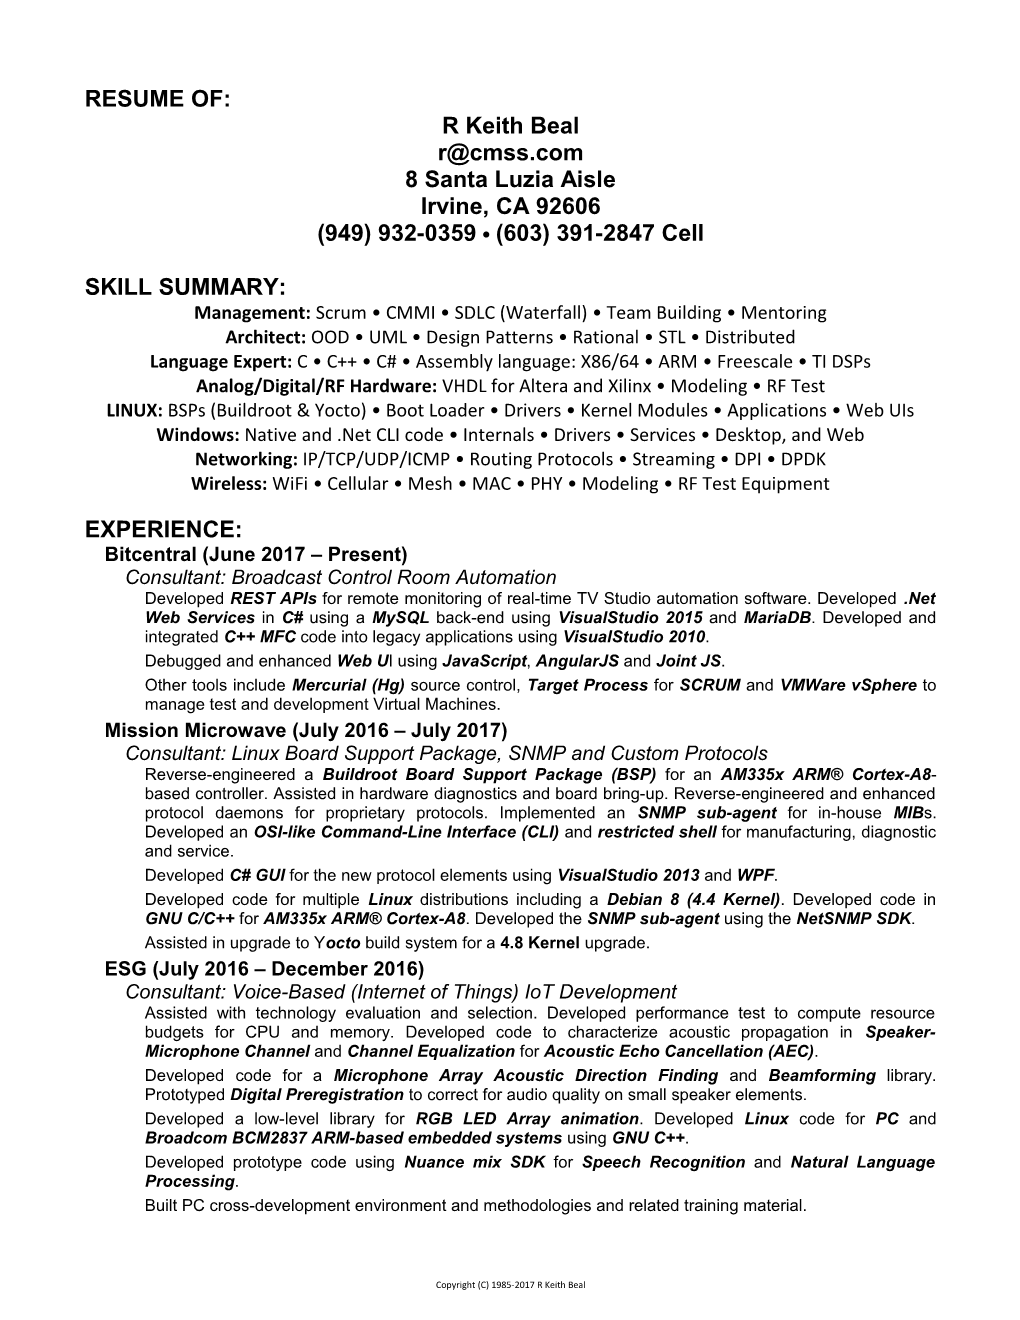 Resume of R. Keith Beal